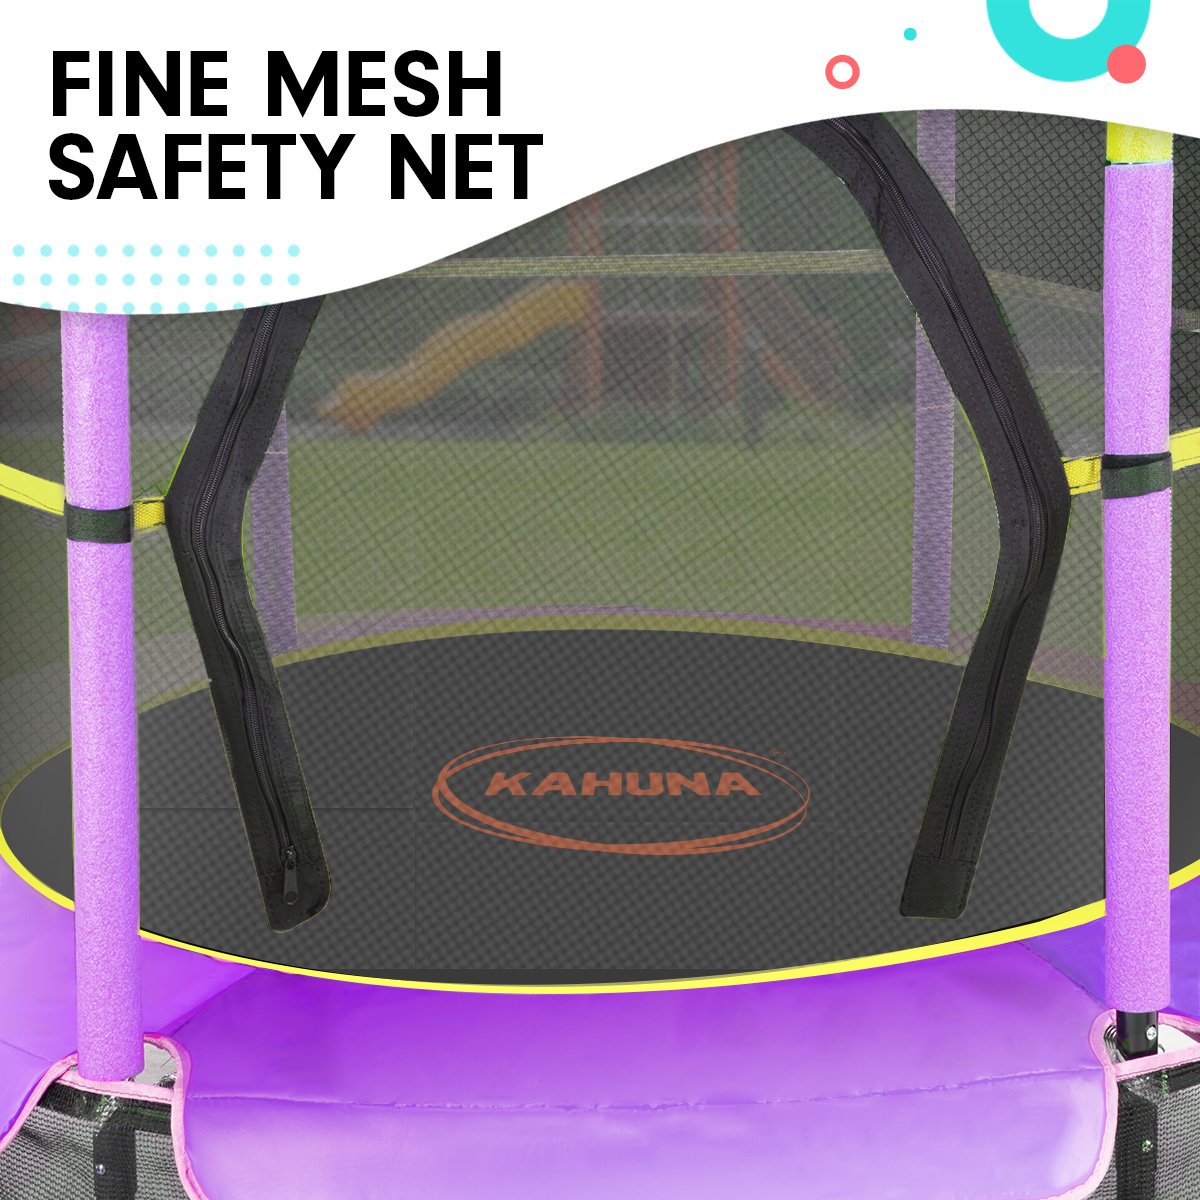 Kahuna 4.5ft Trampoline Round Free Safety Net Spring Pad Cover Mat Outdoor Yellow Purple | Auzzi Store